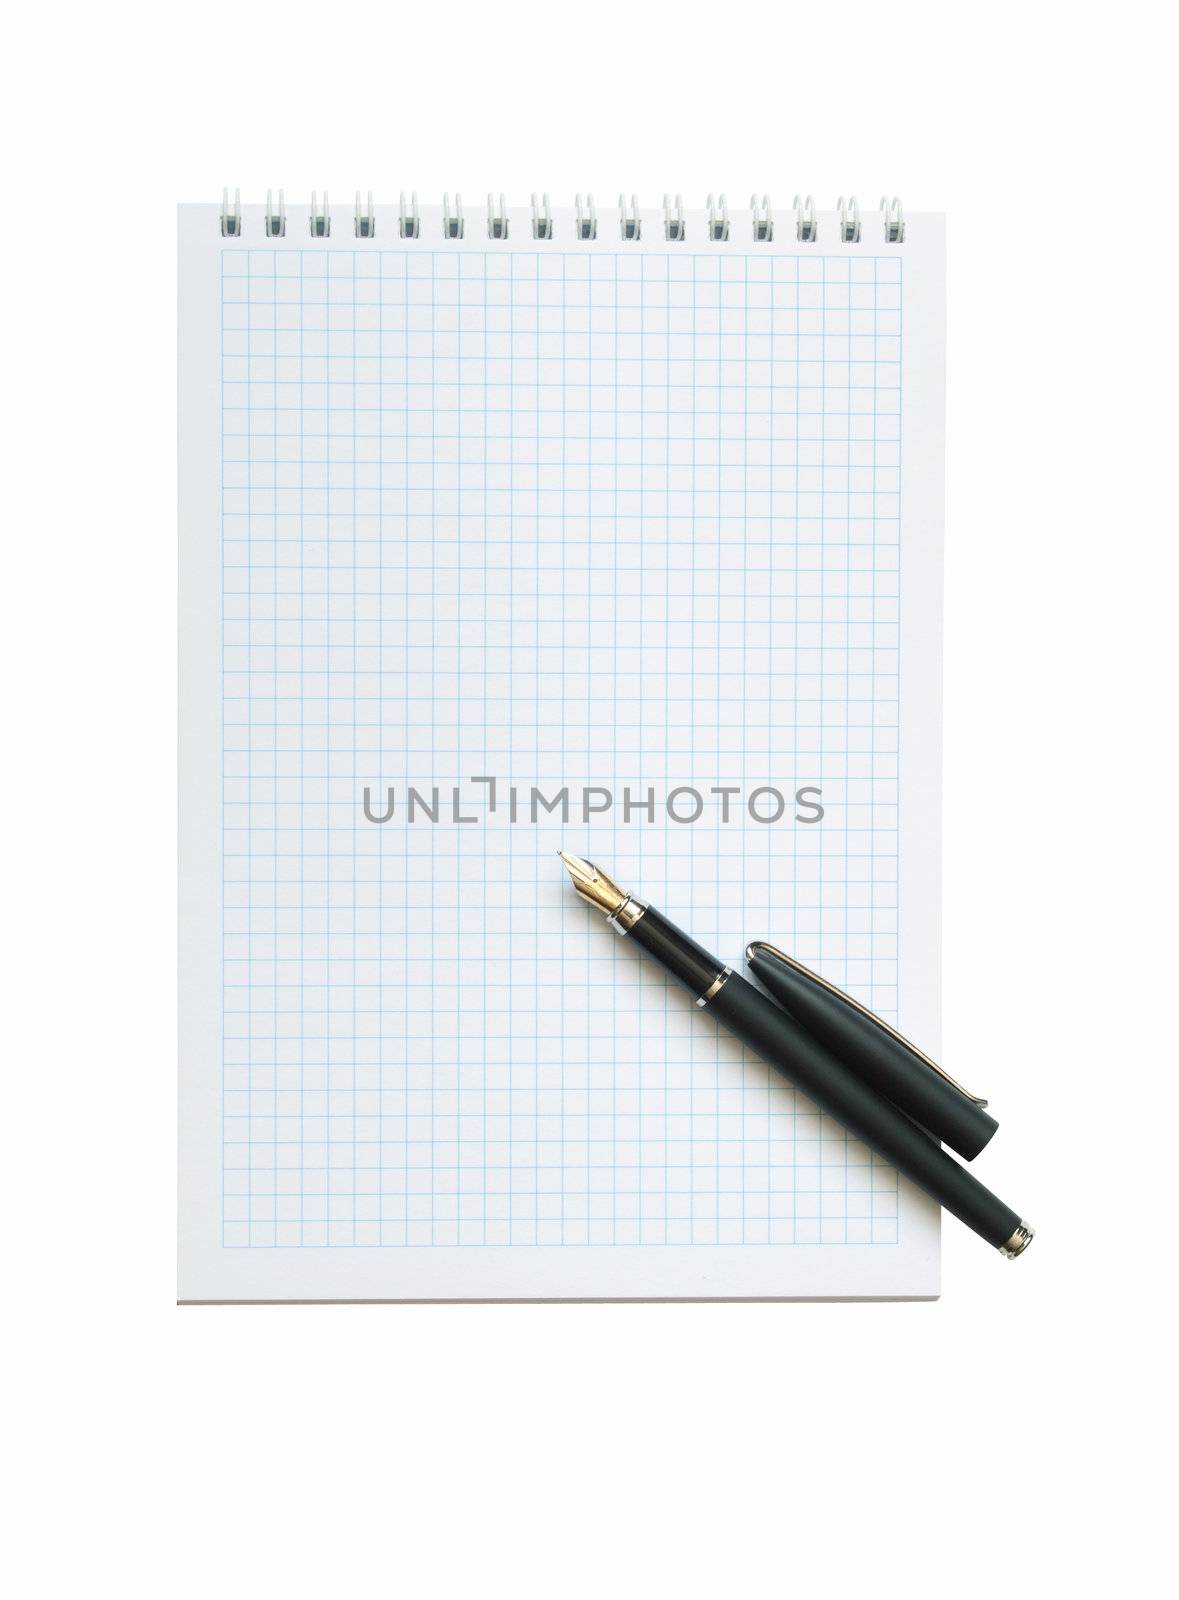 Fontain pen lying on open spiral notebook. Isolated on white with clipping path